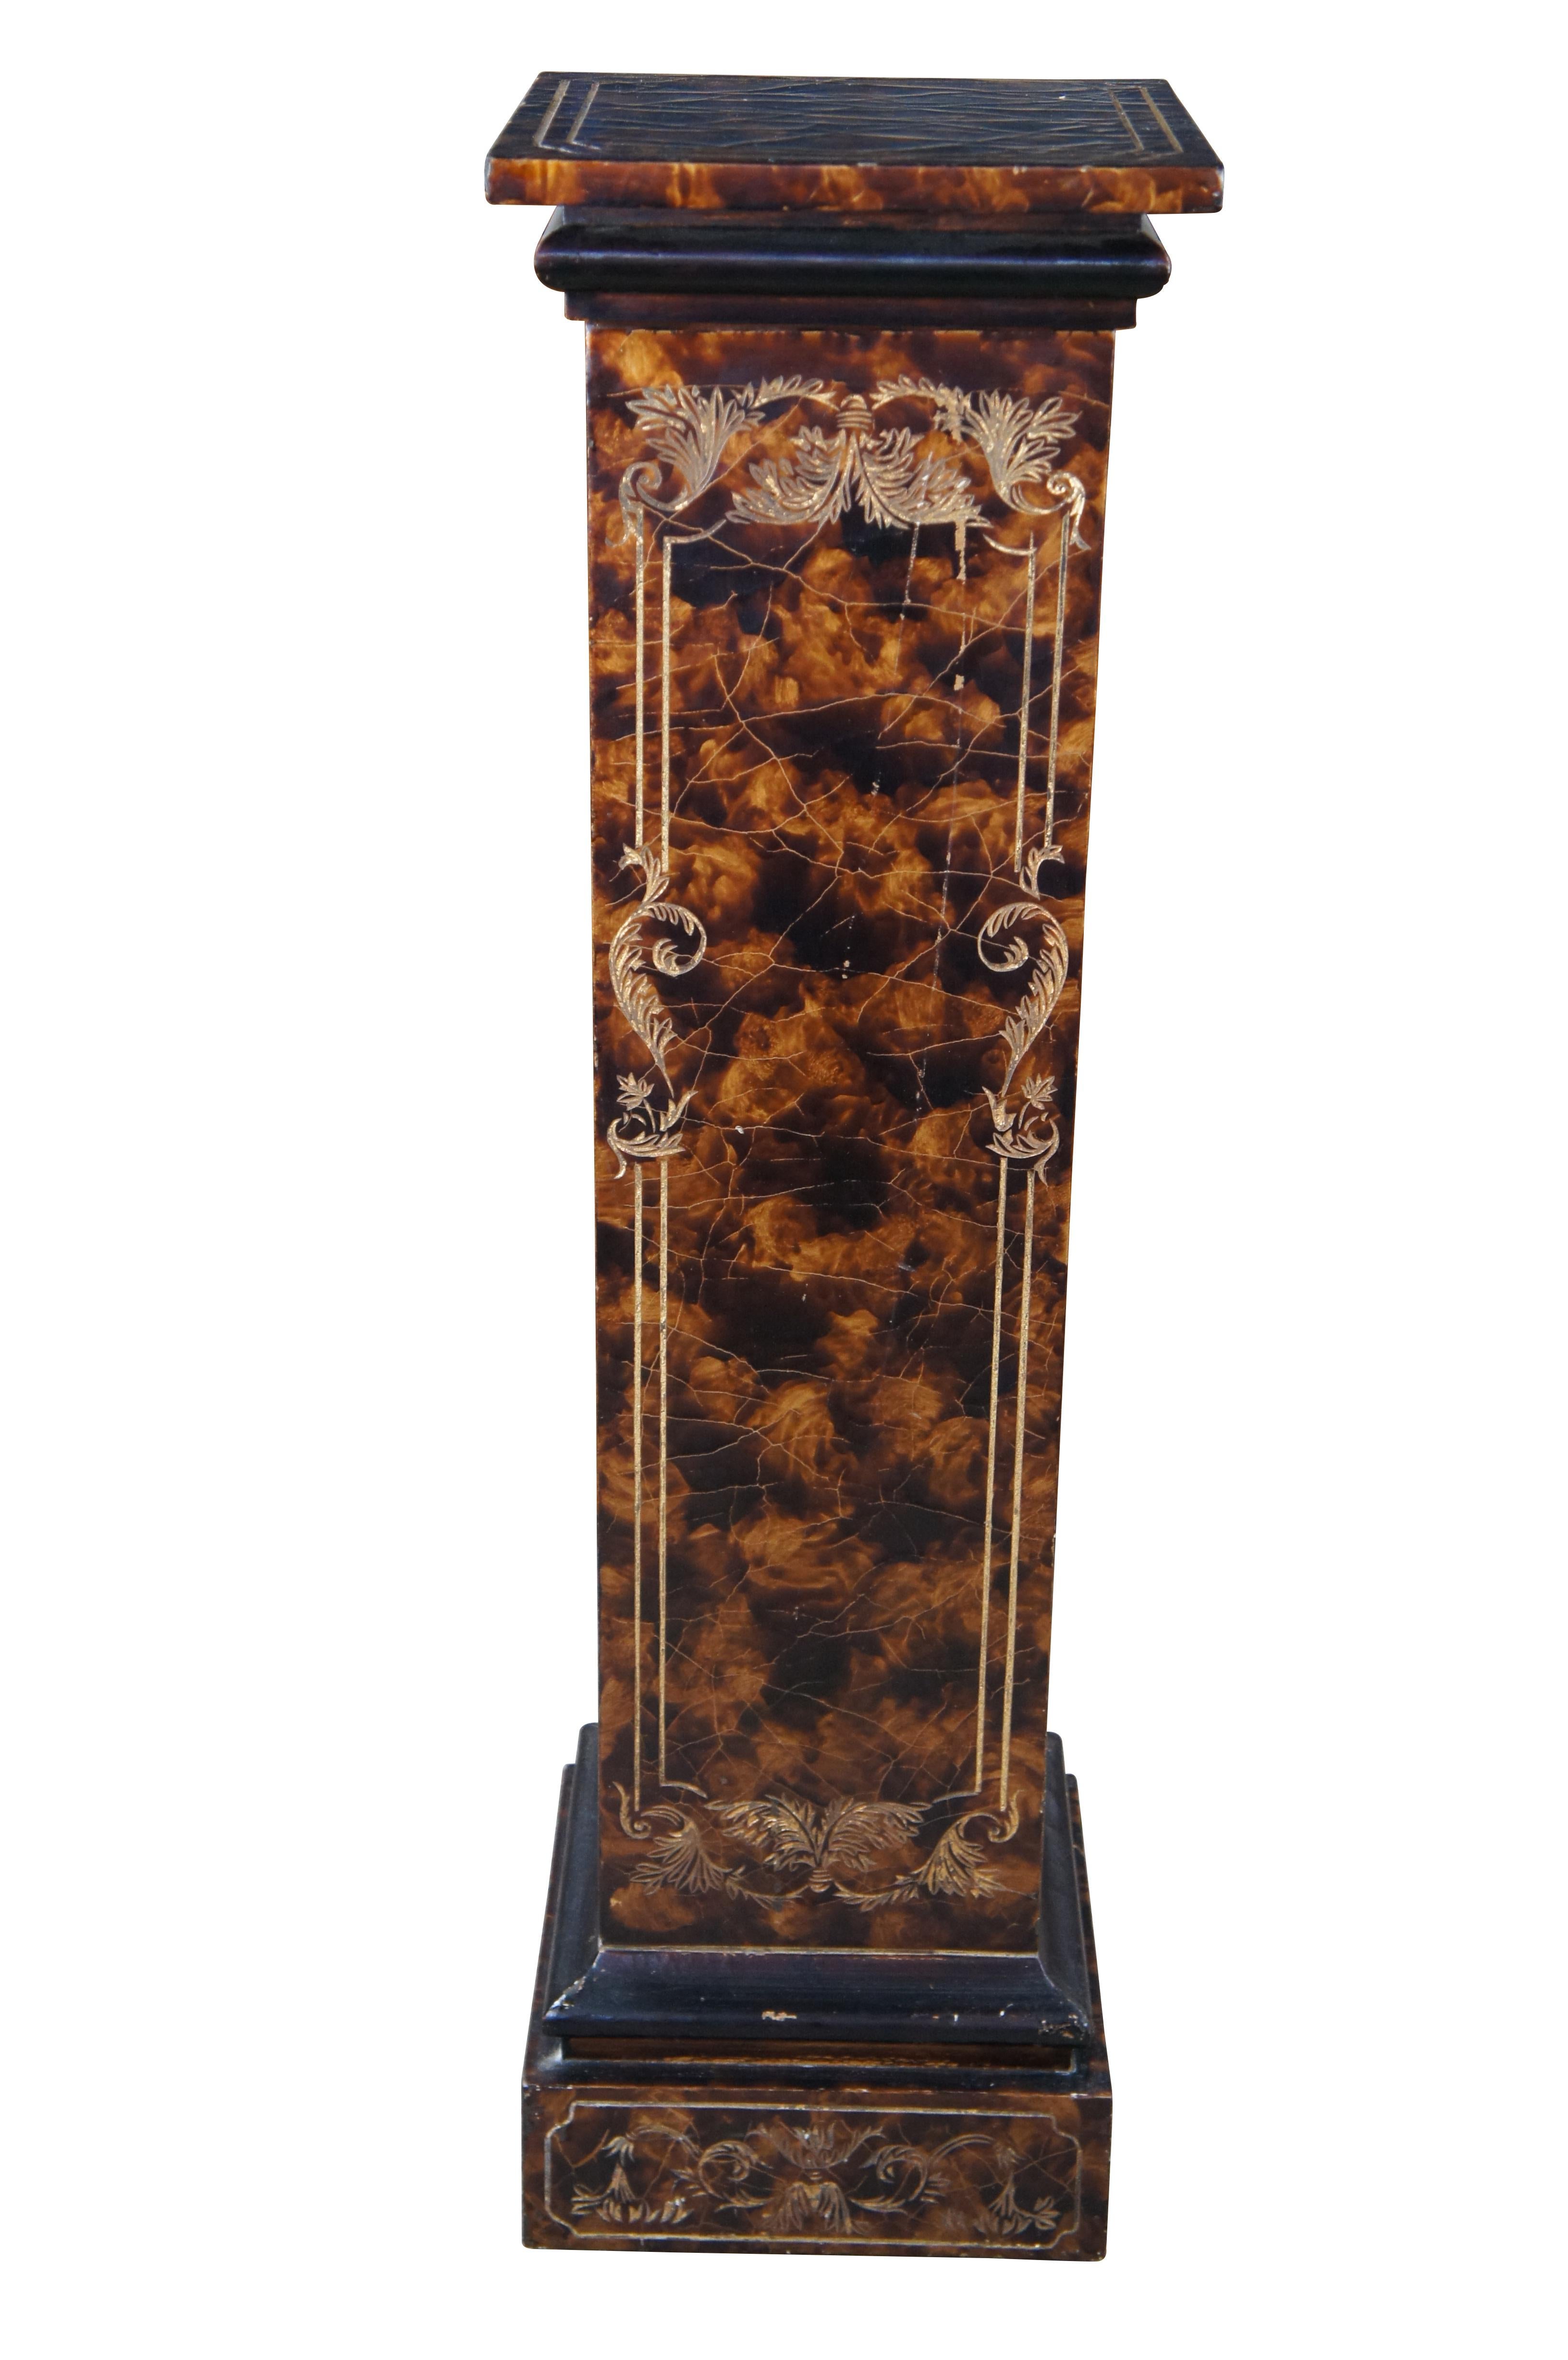 A Chinese Coramandel Faux Tortoise Shell pedestal or sculpture stand by Maitland Smith, Circa 1980s. Features a traditional Grecian form with decorative foliate motifs, a floral urn and fluted accents. Marked along underside. Great for display of a